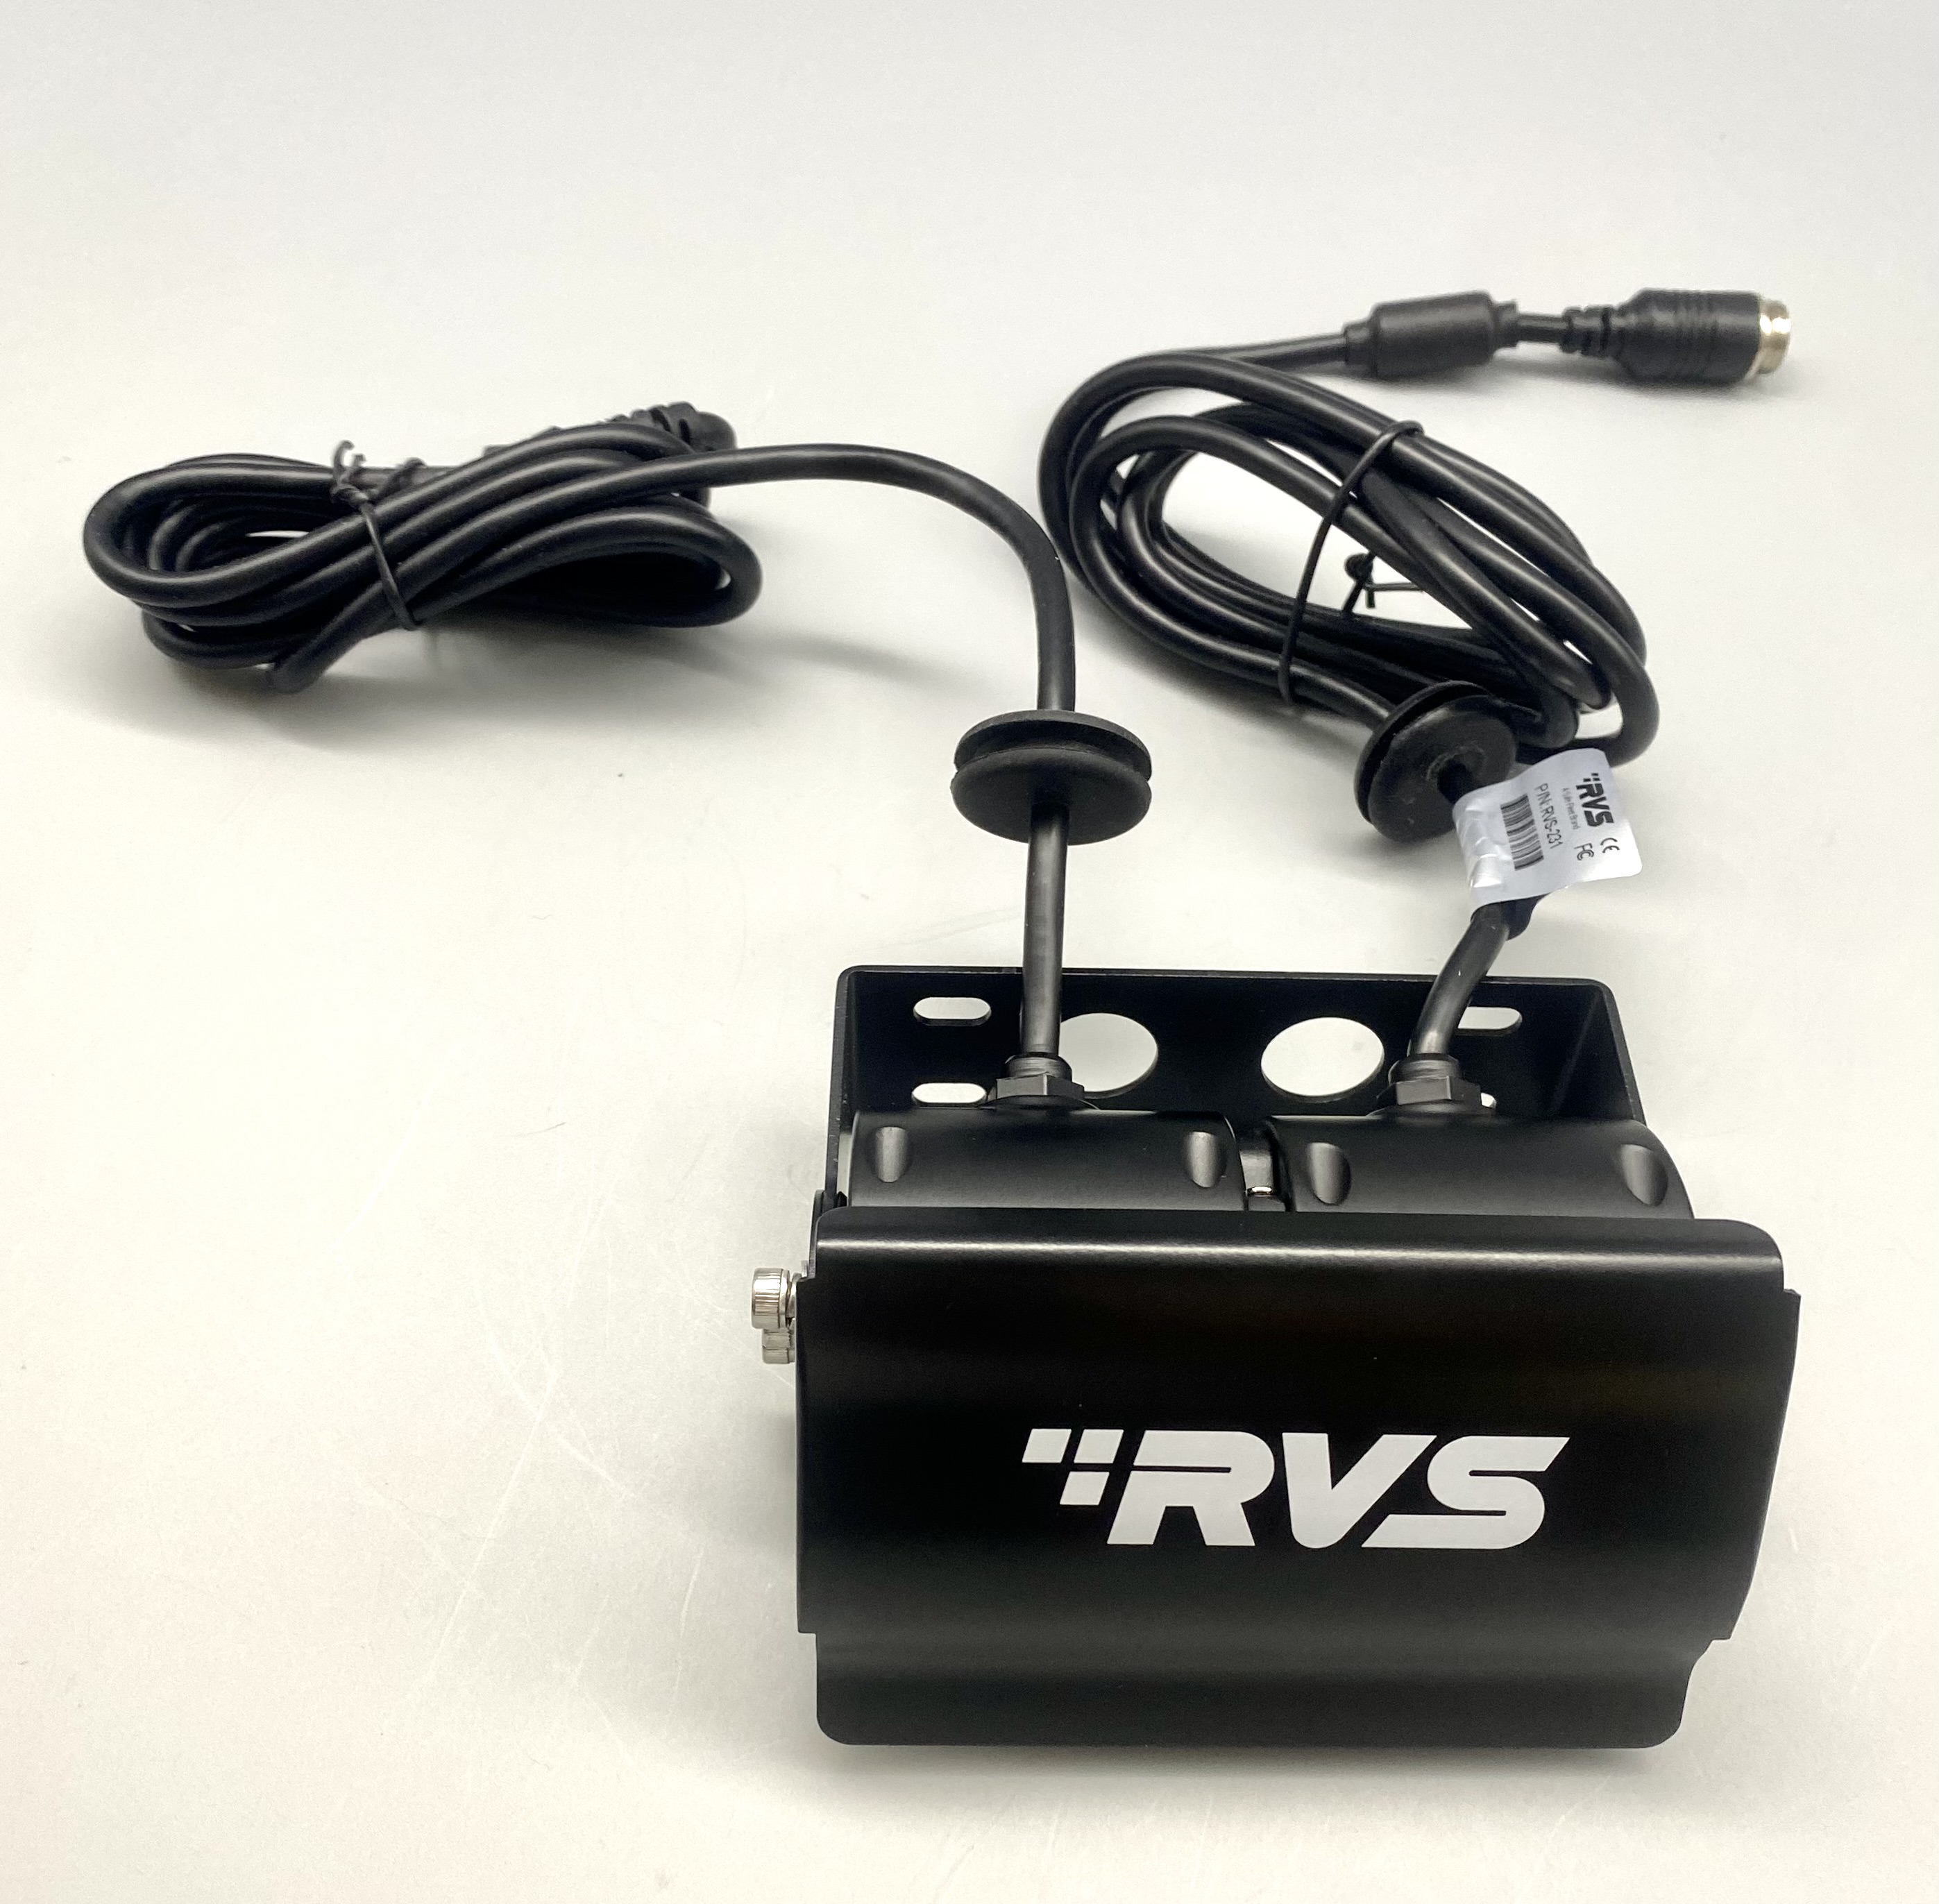 Rearview Safety Dual-Lens Camera with (2) 5-pin RVS Camera Ports